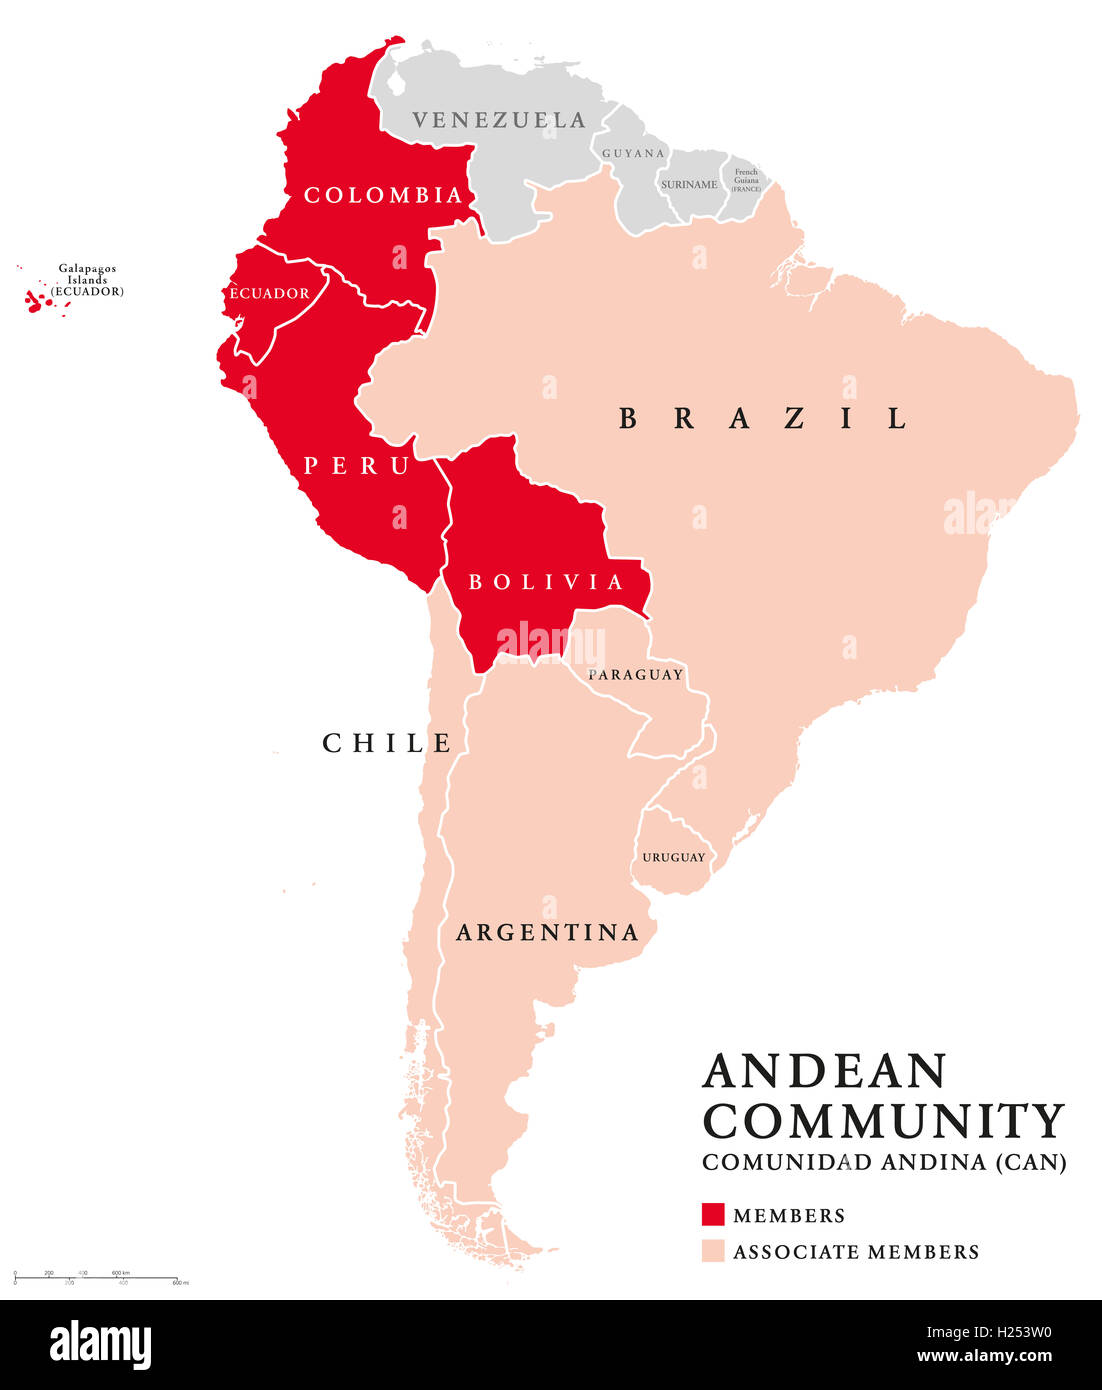 Andean Community countries map, a trade bloc. Comunidad Andina, CAN. Stock Photo